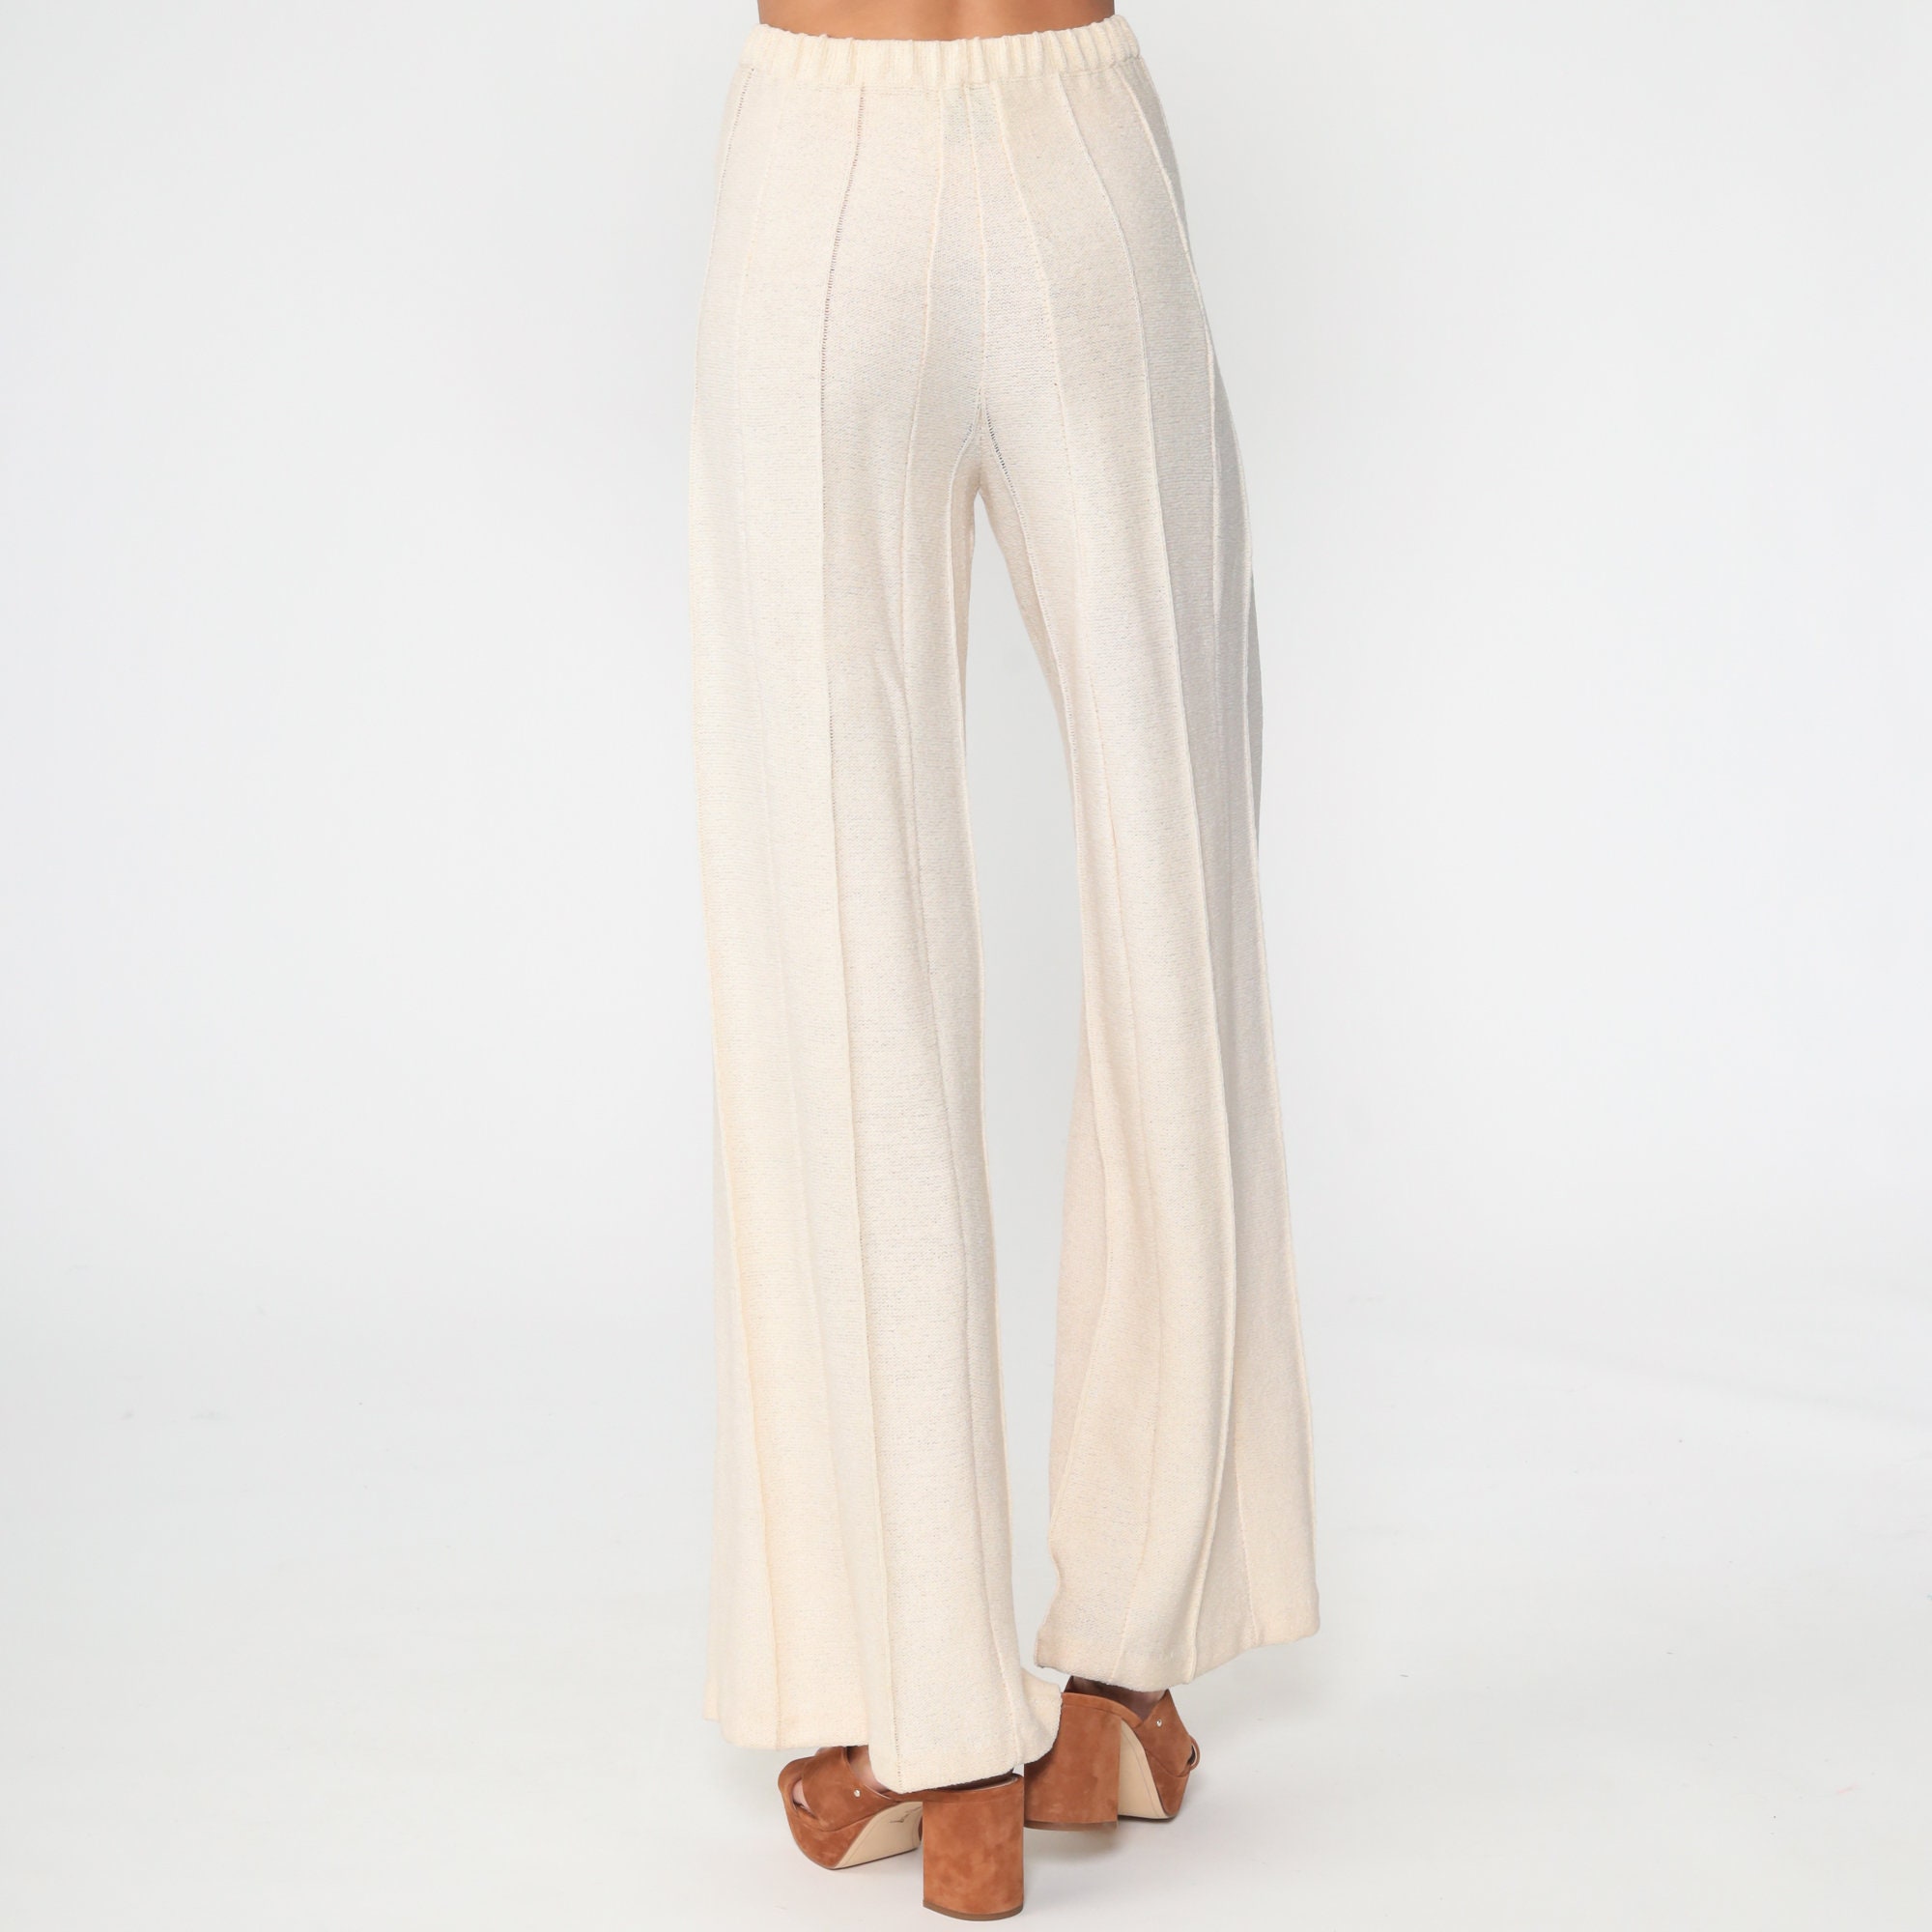 70s Bell Bottom Pants Beige Knit Trousers High Waisted Bellbottom Pants ...